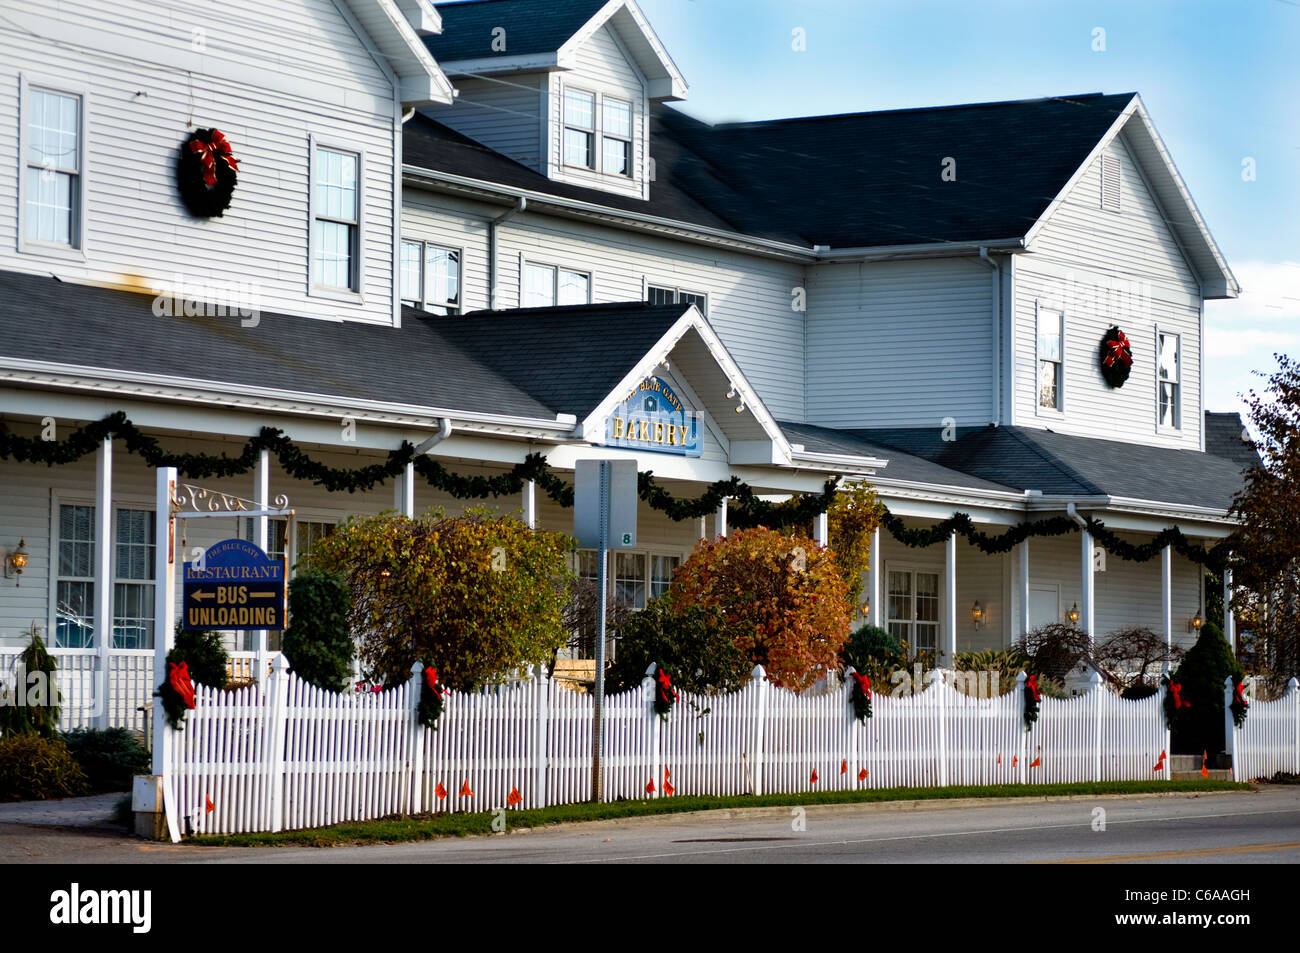 The famous Blue Gate Restaurant and Bakery, popular for its Amish food, in Shipshewana, Indiana. Stock Photo